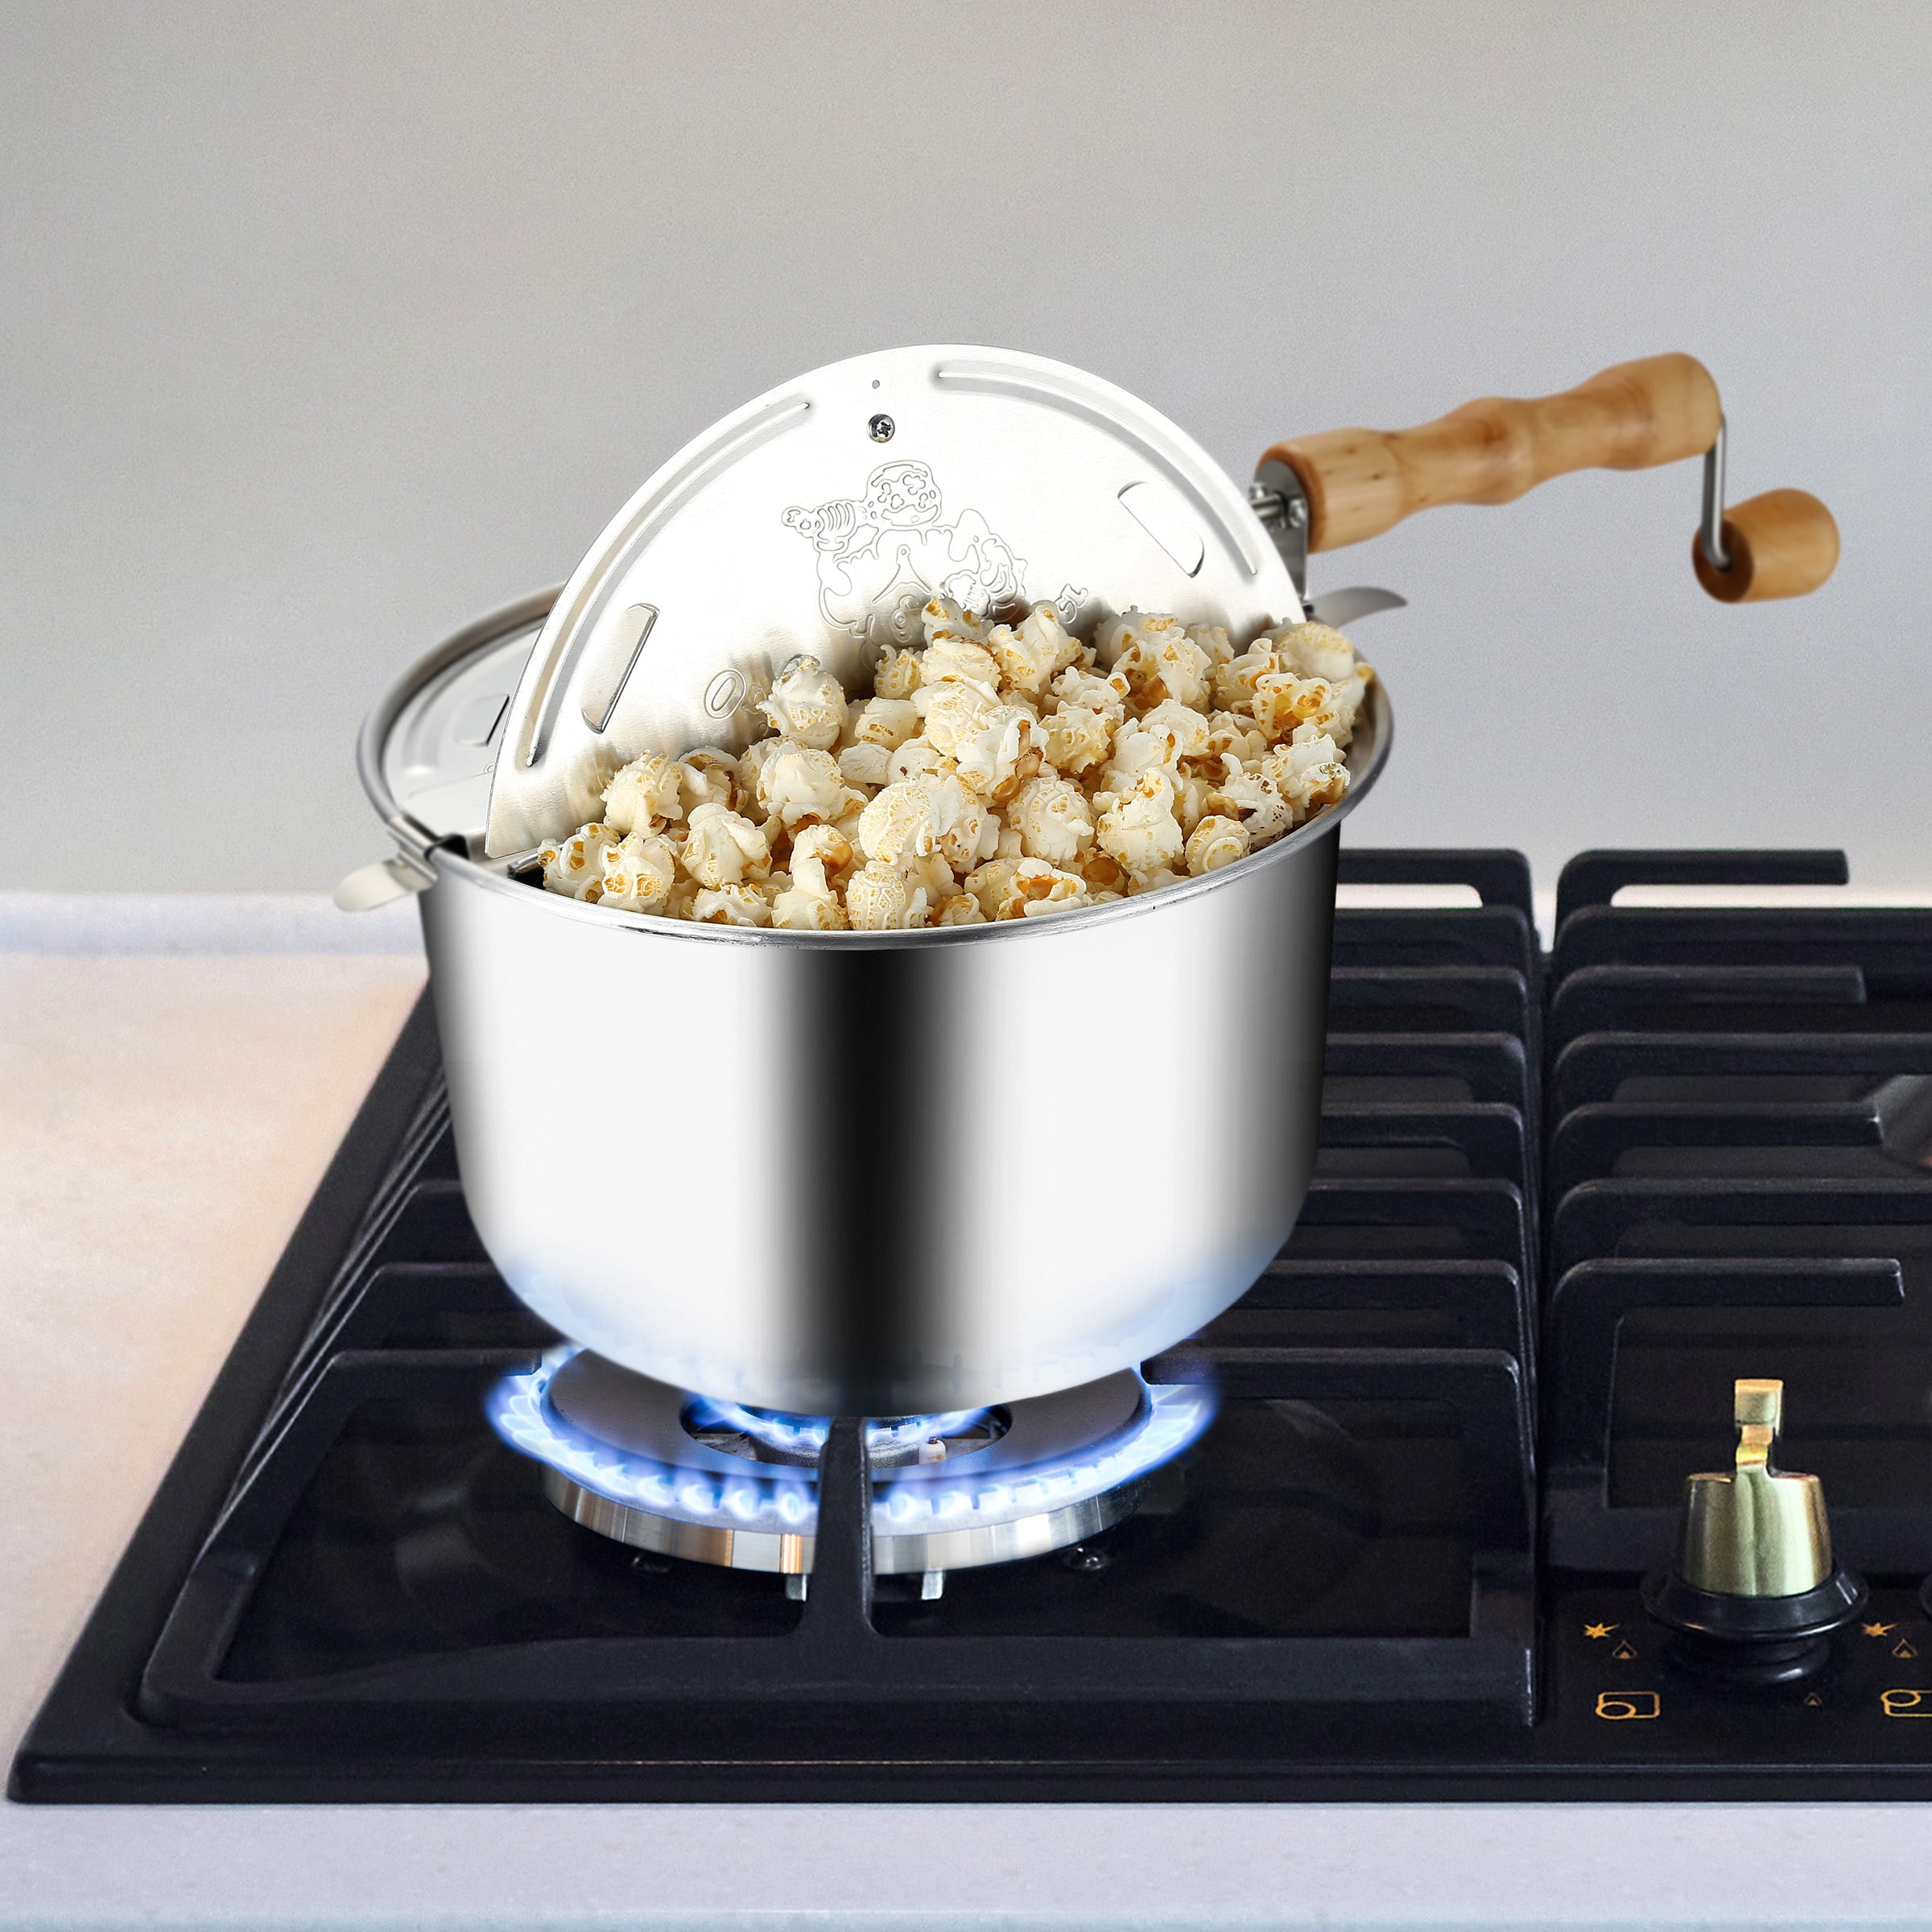 Take your popcorn to gooey new heights with a built-in melting pot - CNET